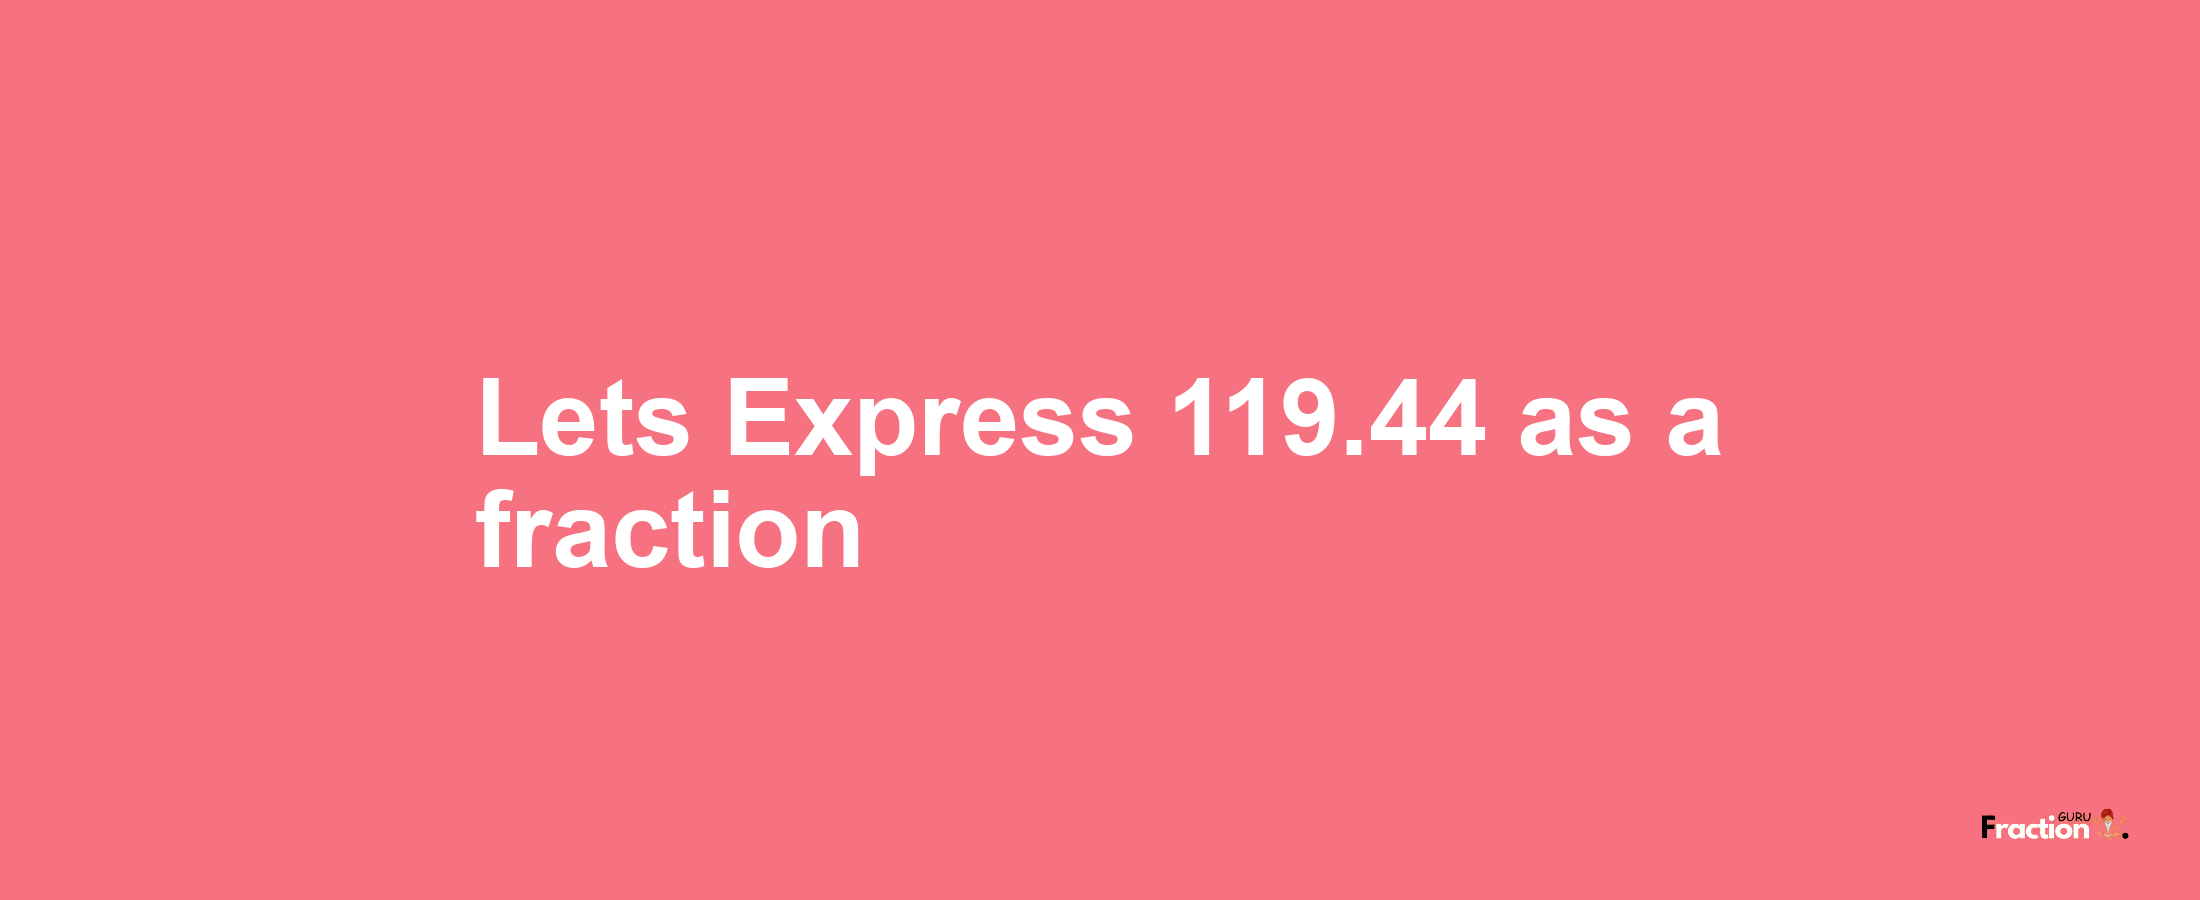 Lets Express 119.44 as afraction